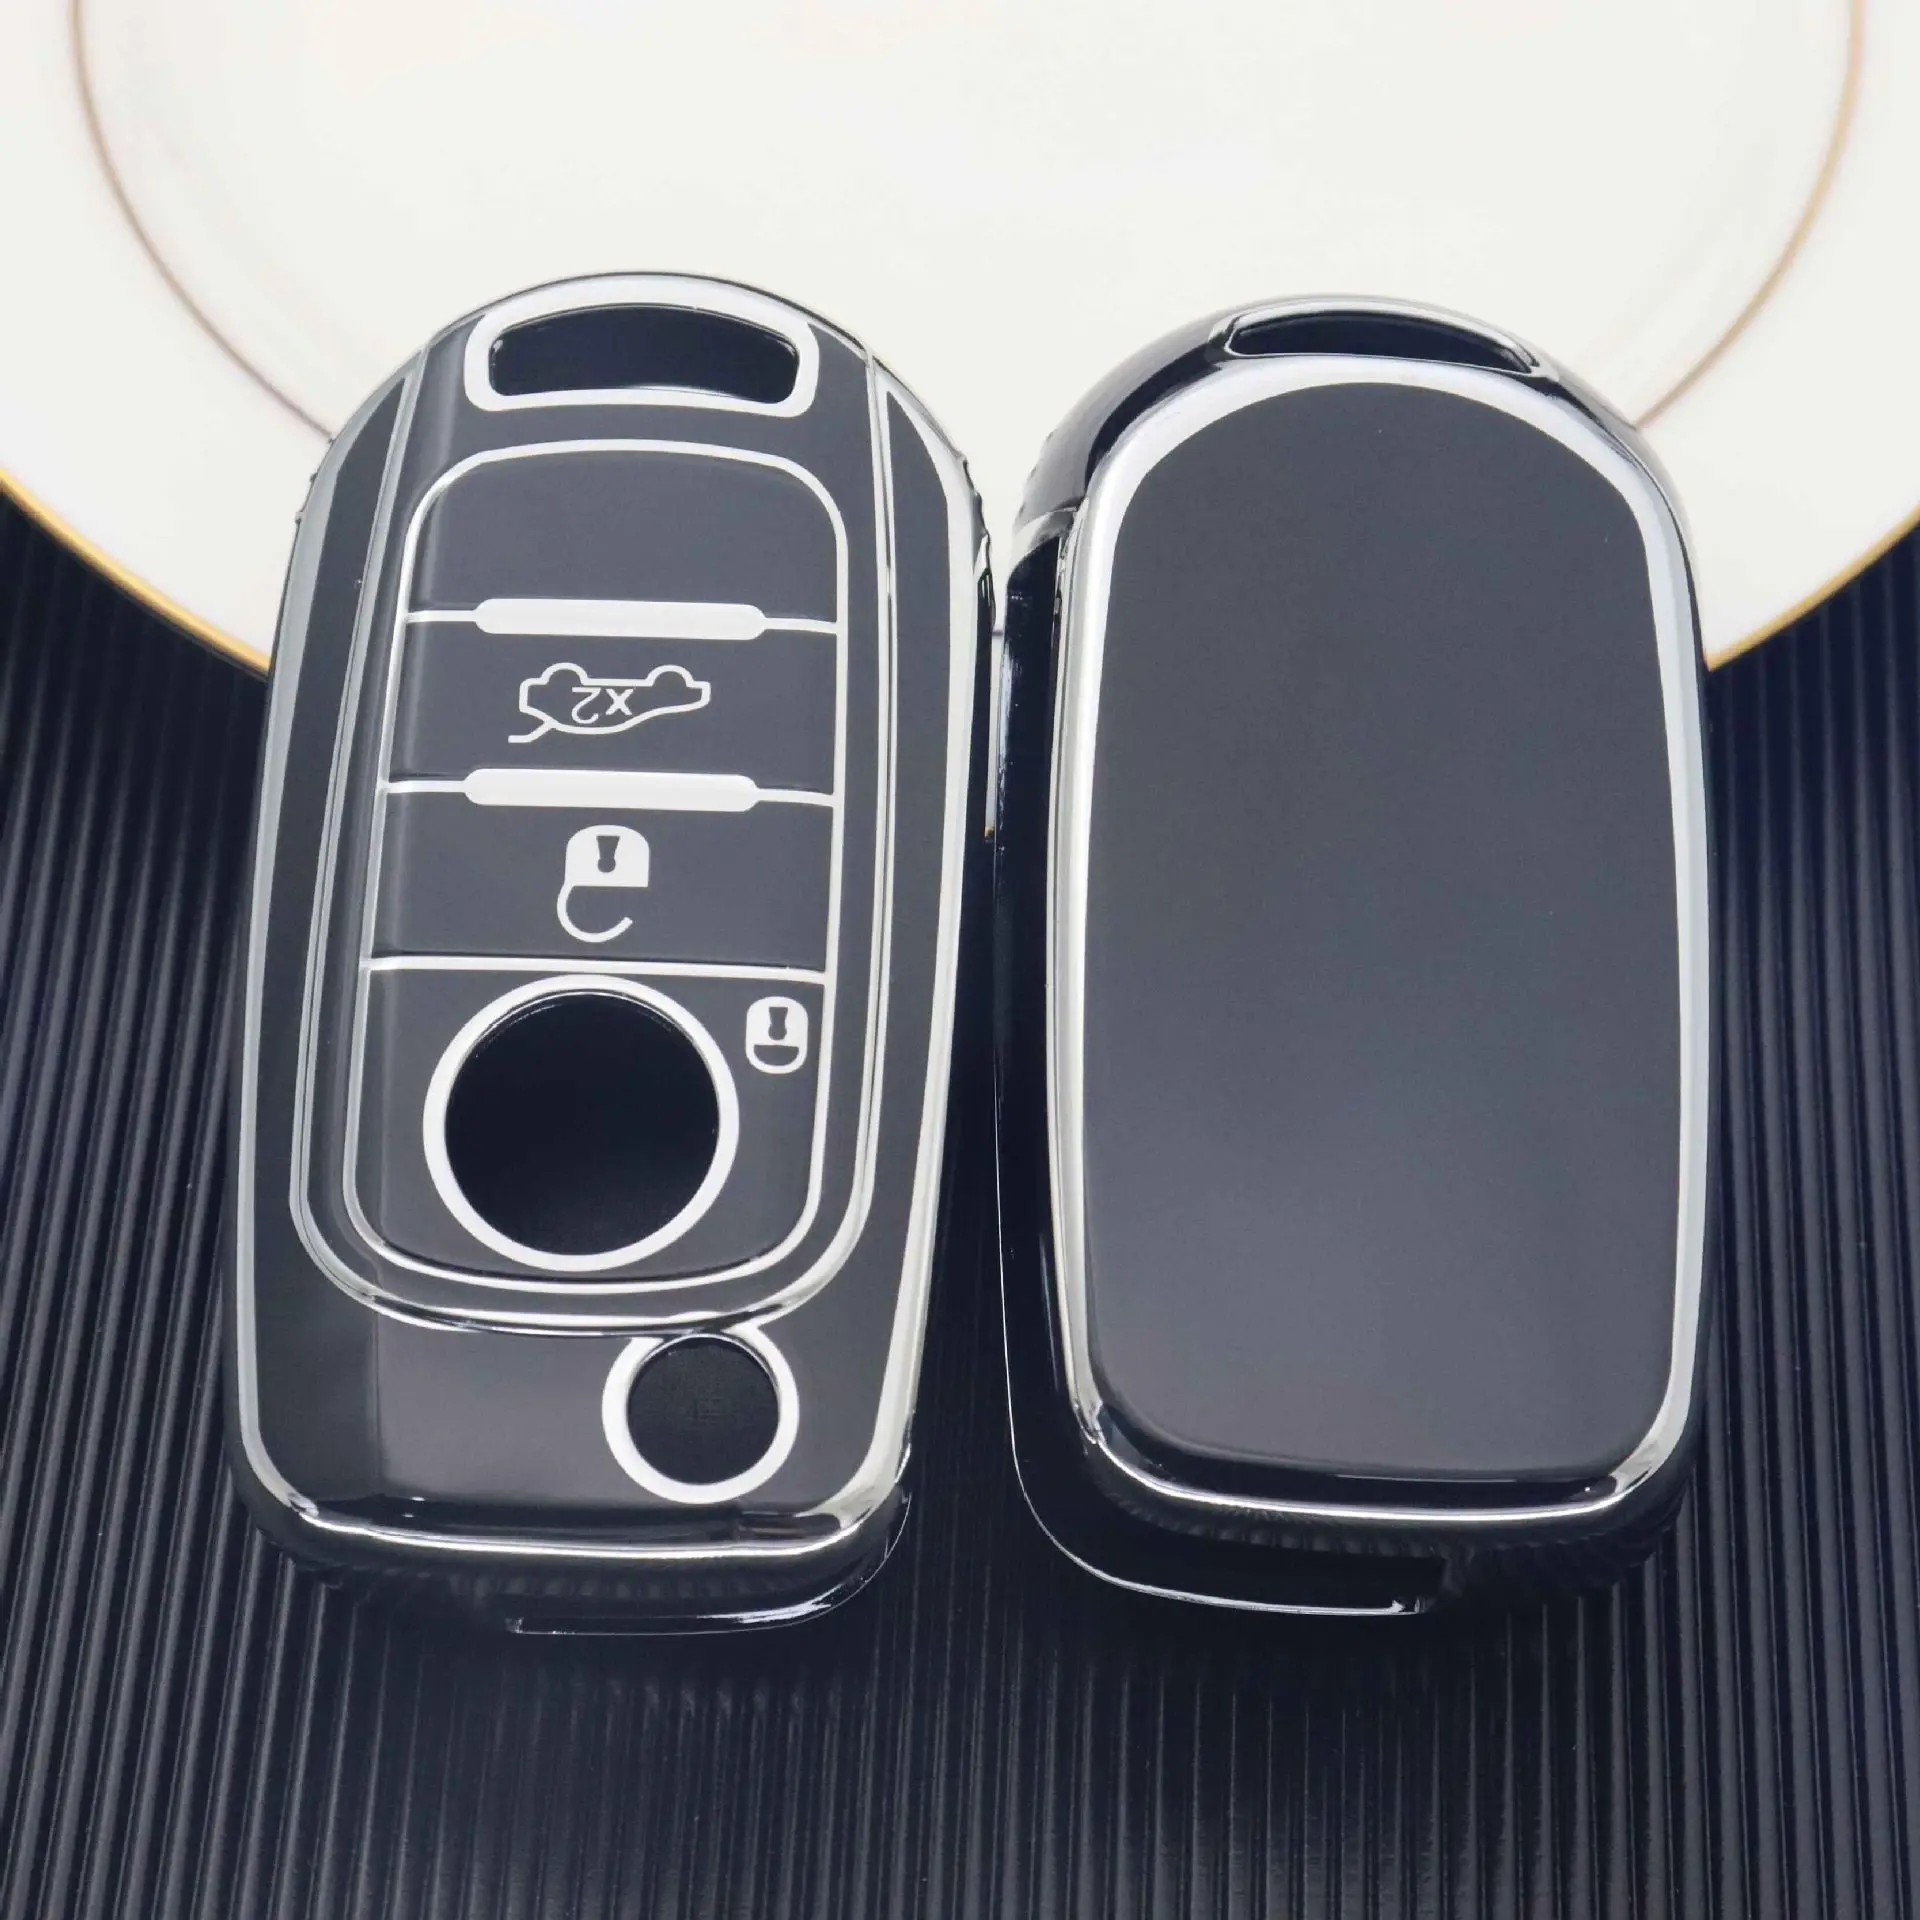 TPU 3 Buttons Key Case Cover for Fiat Cronos Egea 500X Toro Tipo for Dodge Neon Keyless Fob Shell Skin Holder Protector